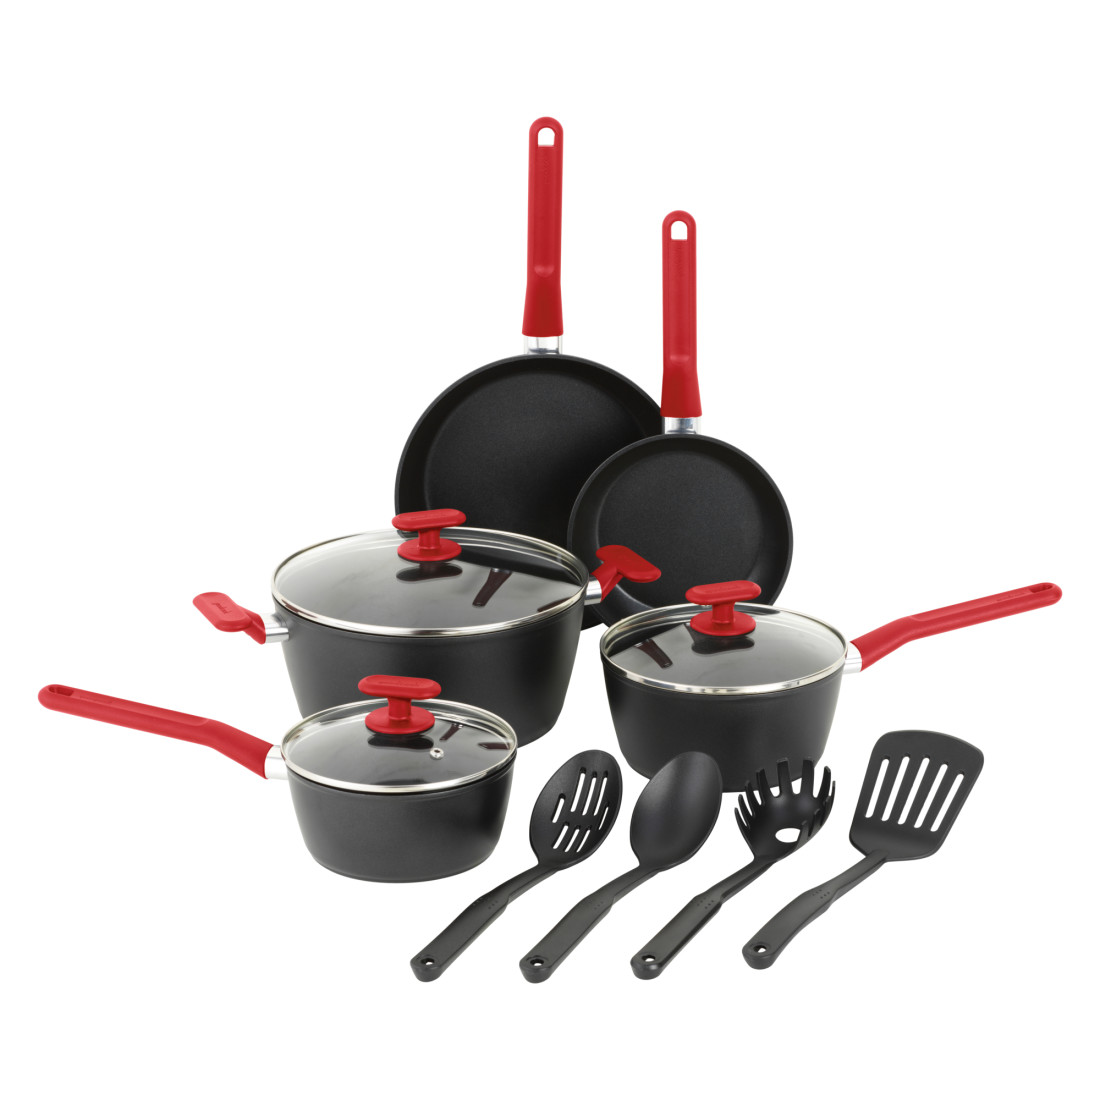 Cook N Home 3-Pieces Frying Saute Pan Set with Non-stick Coating